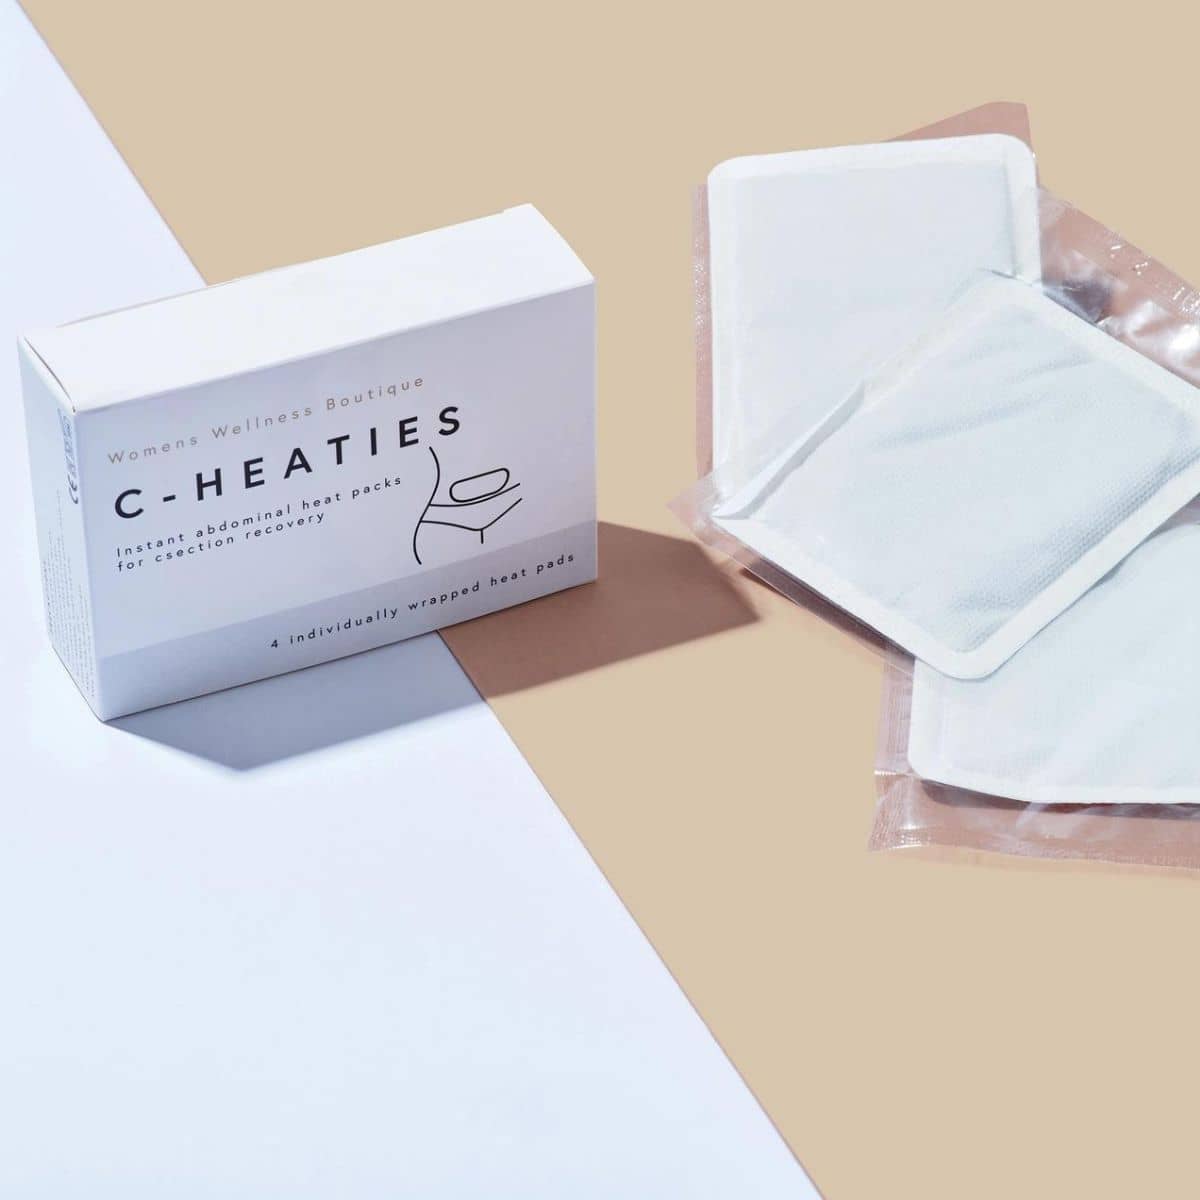 Womens Wellness Boutique C-Heaties - Instant Heat Packs For Csection Scars